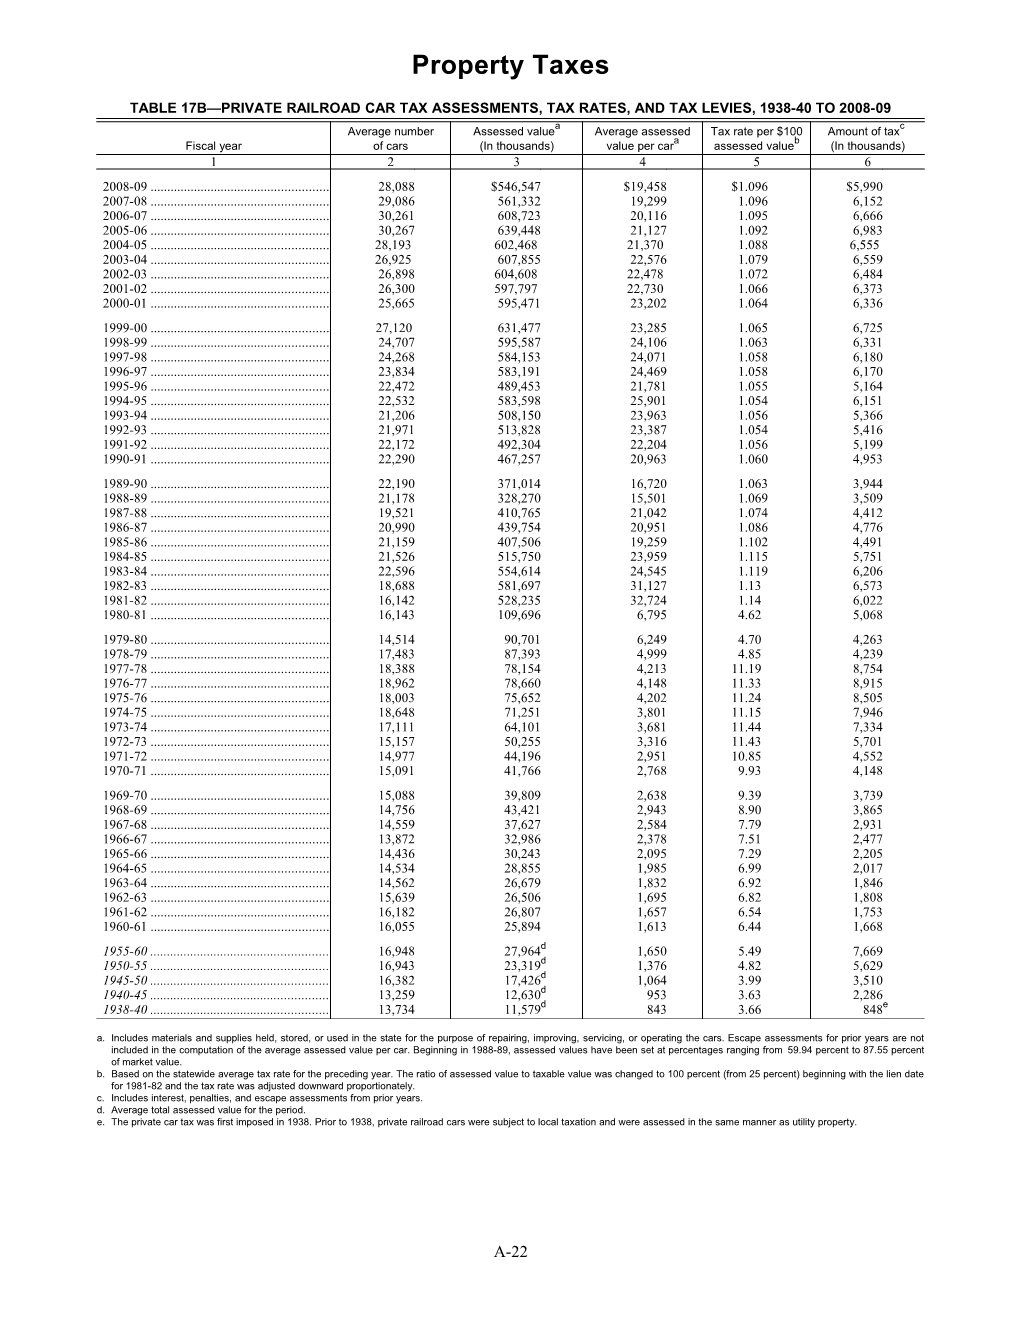 Table 17B Private Railroad Car Tax Assessments, Tax Rates, and Tax Levies, 1938-40 to 2008-09